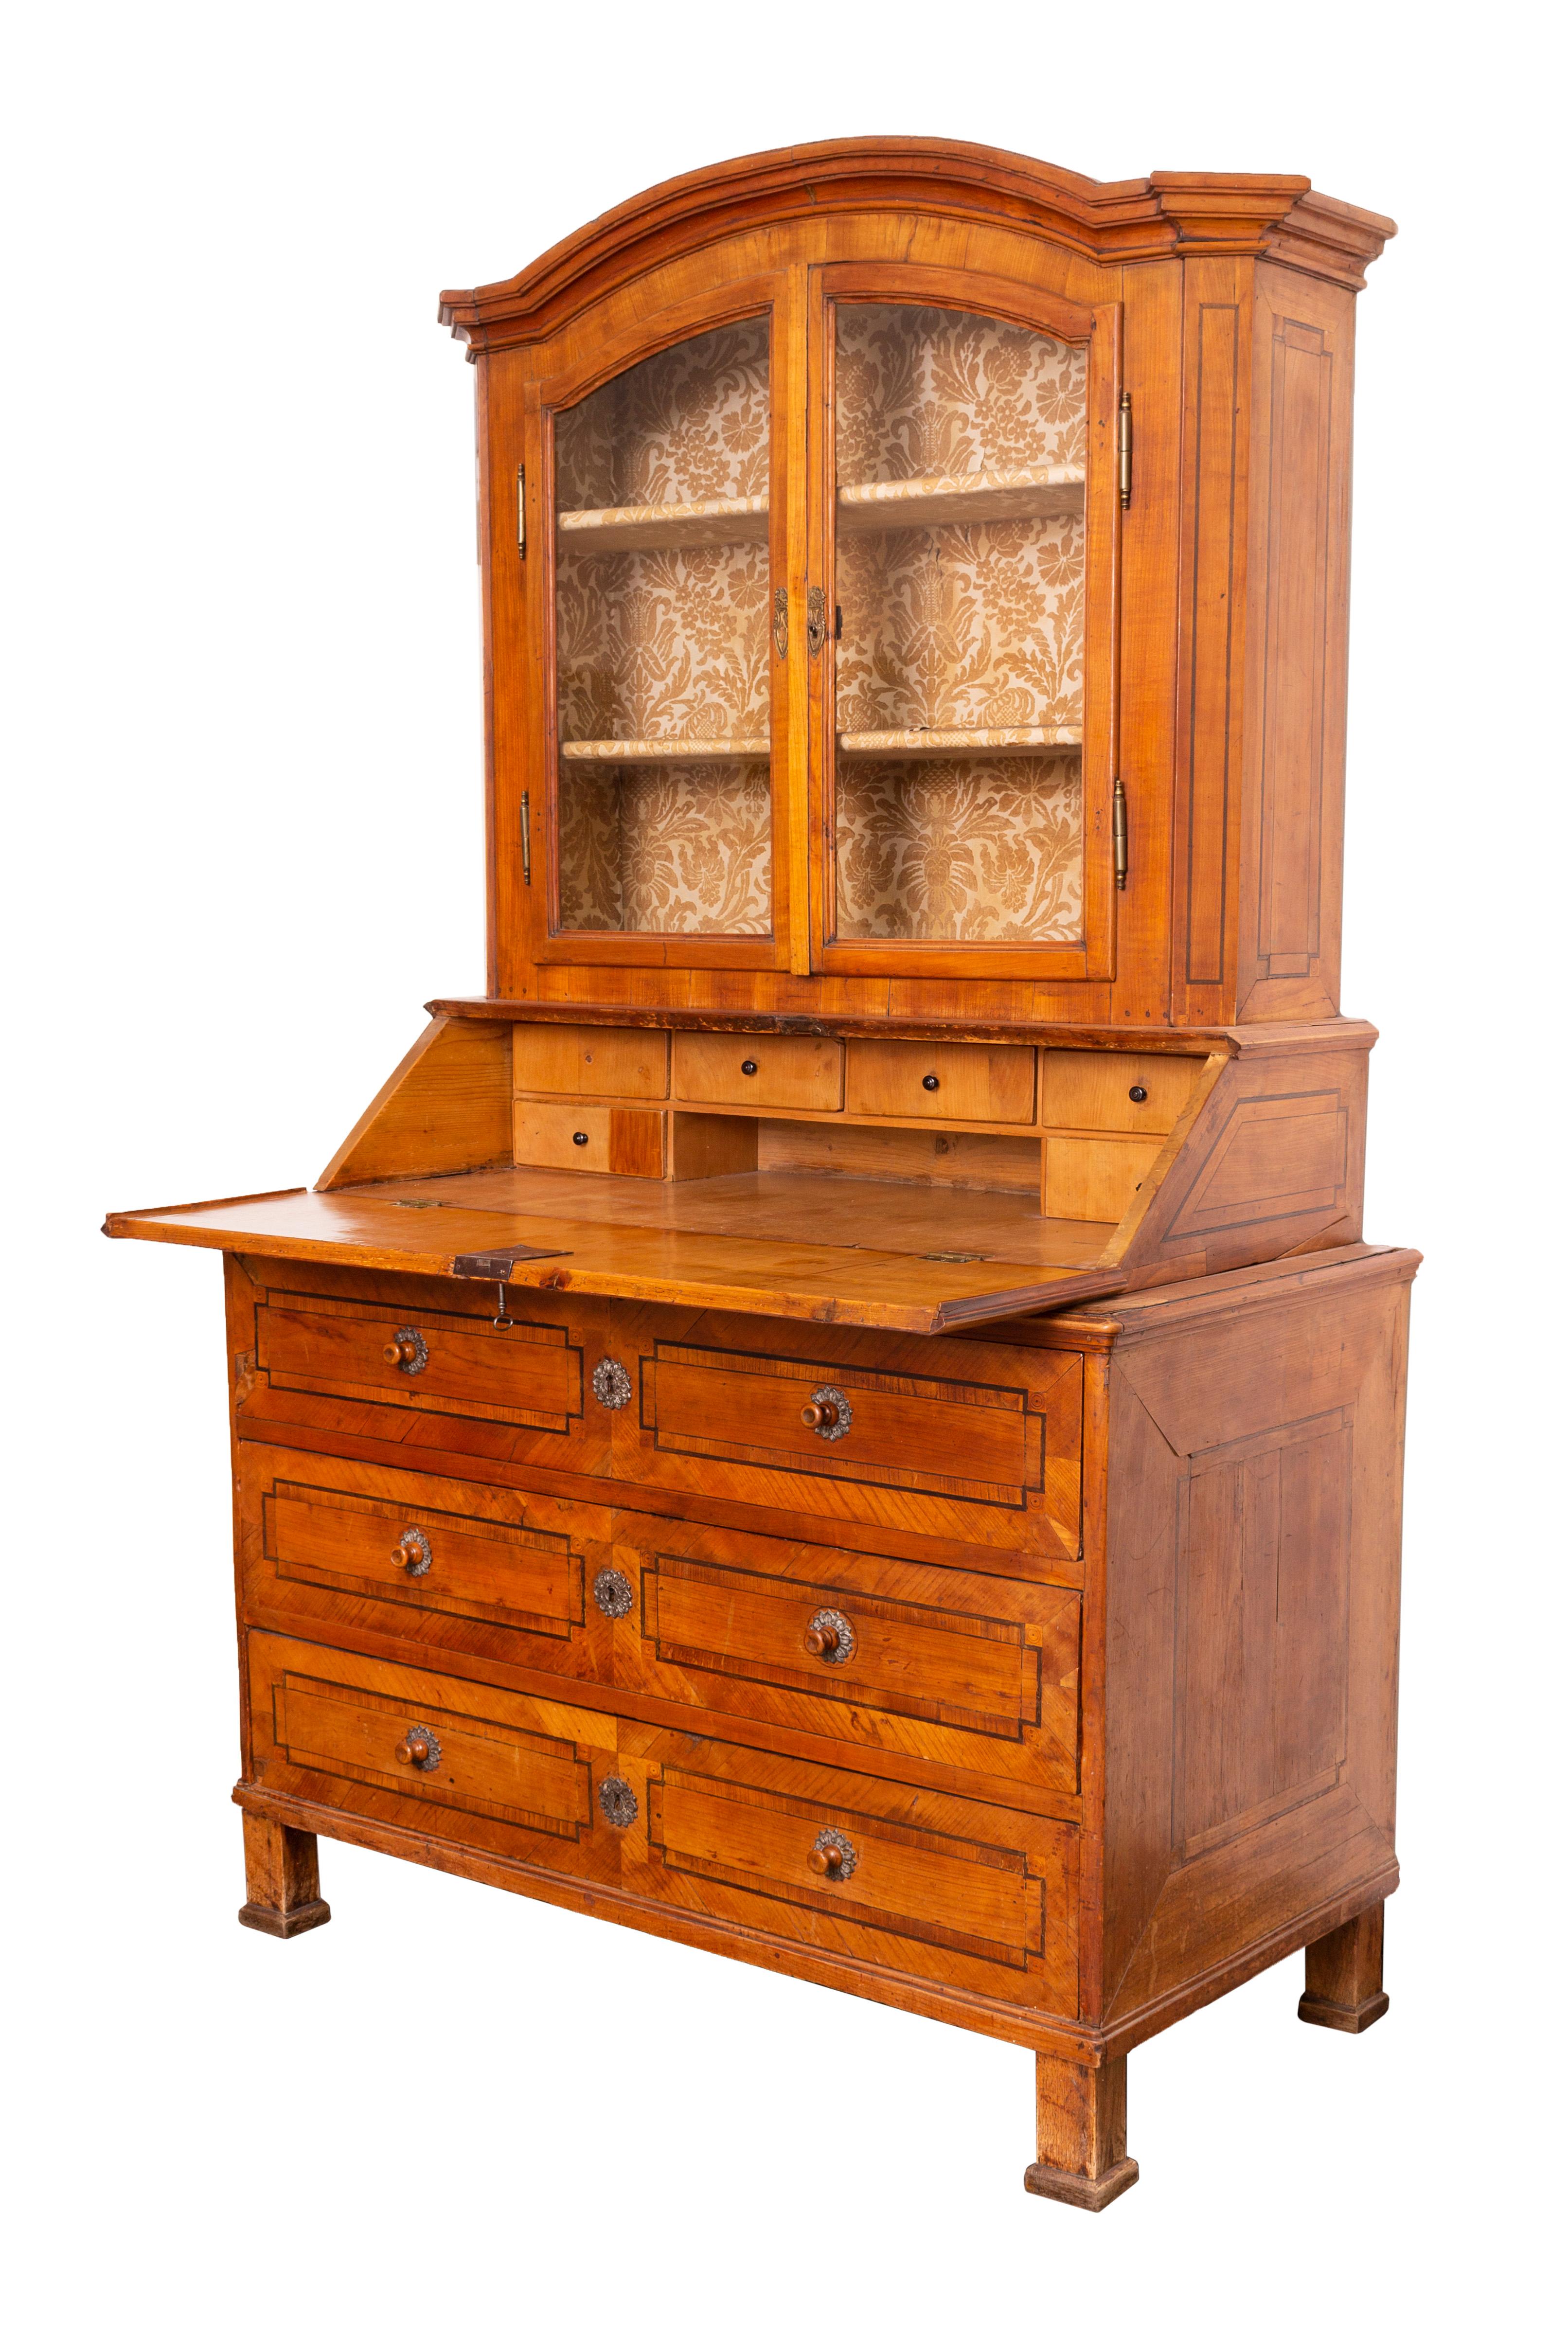 Early 19th century hutch, (combination of a writing secretaire and a glass cabinet) in Copf-Style. The pine corpus has a cherry veneer, and has fine wooden inlay decoration.

Copf-Style - or in German Zopfstil - markes a stylistic period between